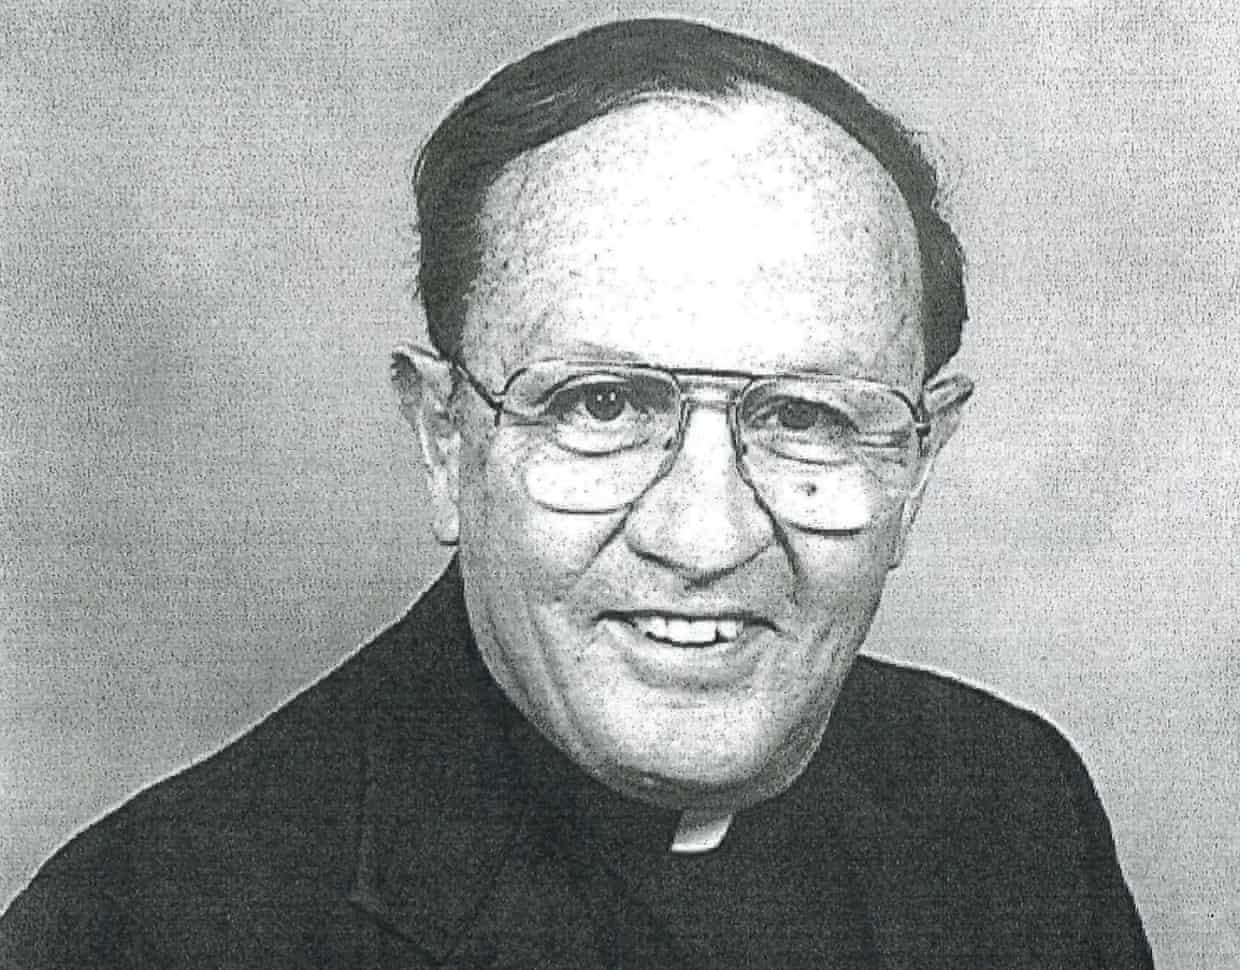 In a first, New Orleans priest accused of abusing minors admits wrongdoing (theguardian.com)